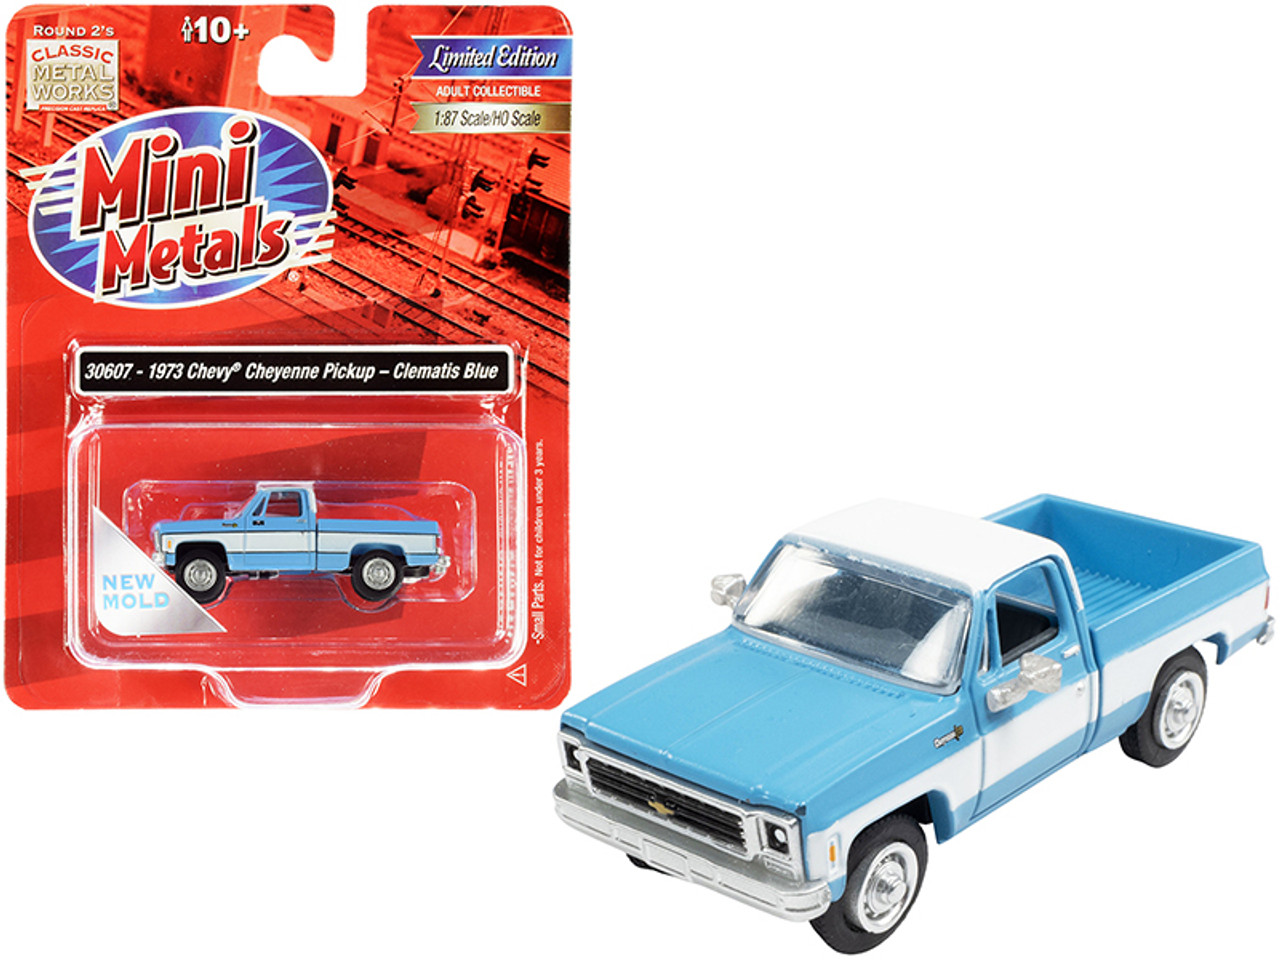 1973 Chevrolet Cheyenne Pickup Truck Clematis Blue and White 1/87 (HO) Scale Model Car by Classic Metal Works